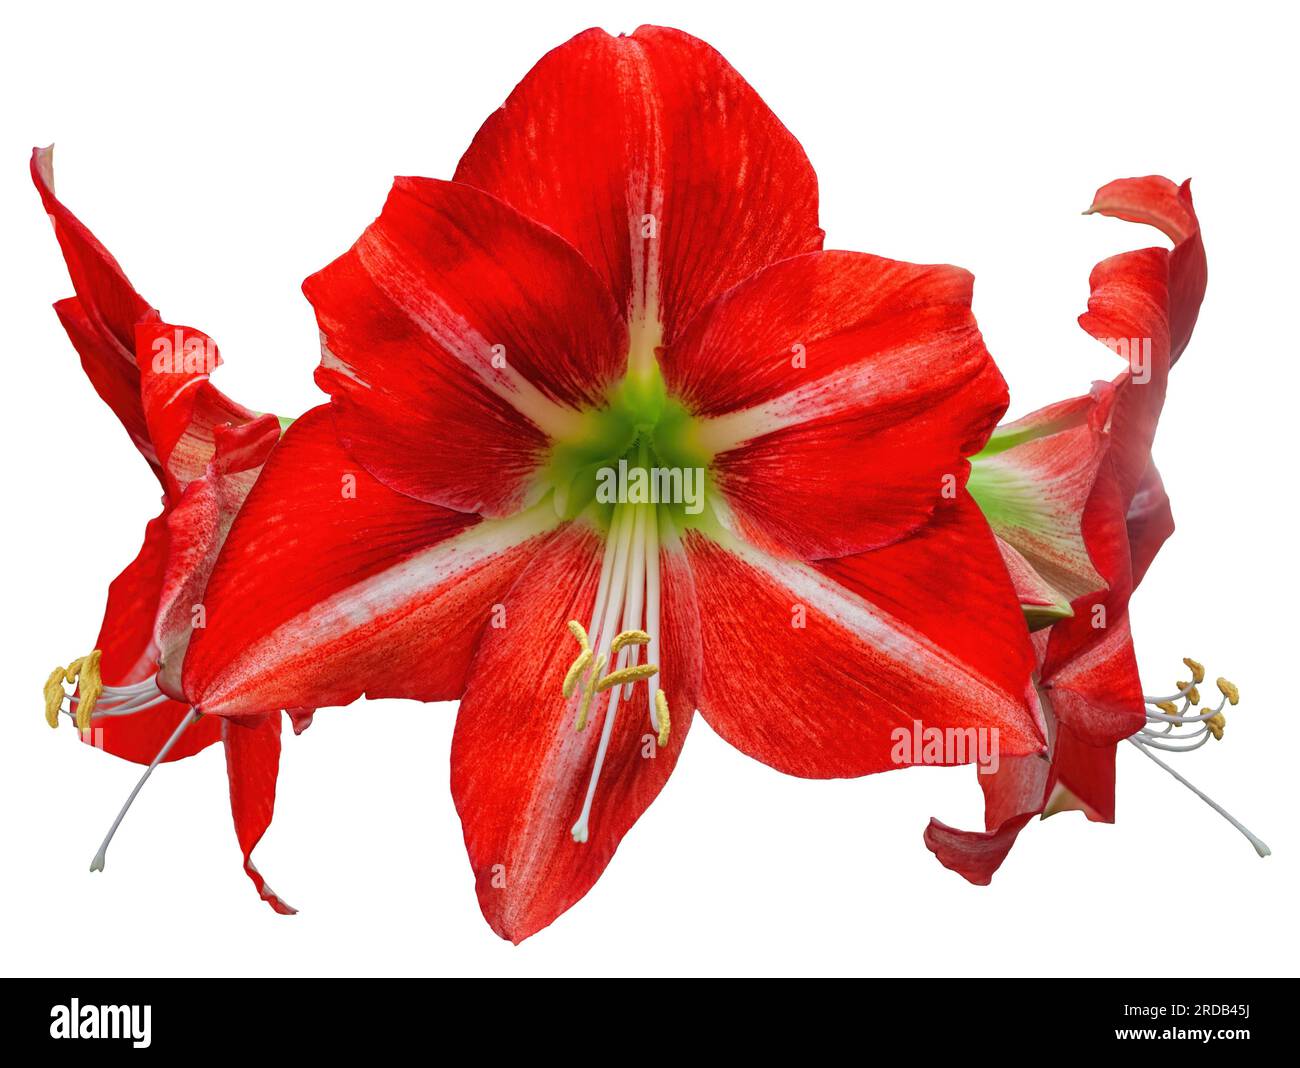 Amaryllis big red flowers isolated on white background close up. Belladonna or Jersey Lilies three flowering plants cut out. Large Hippeastrum bloomin Stock Photo